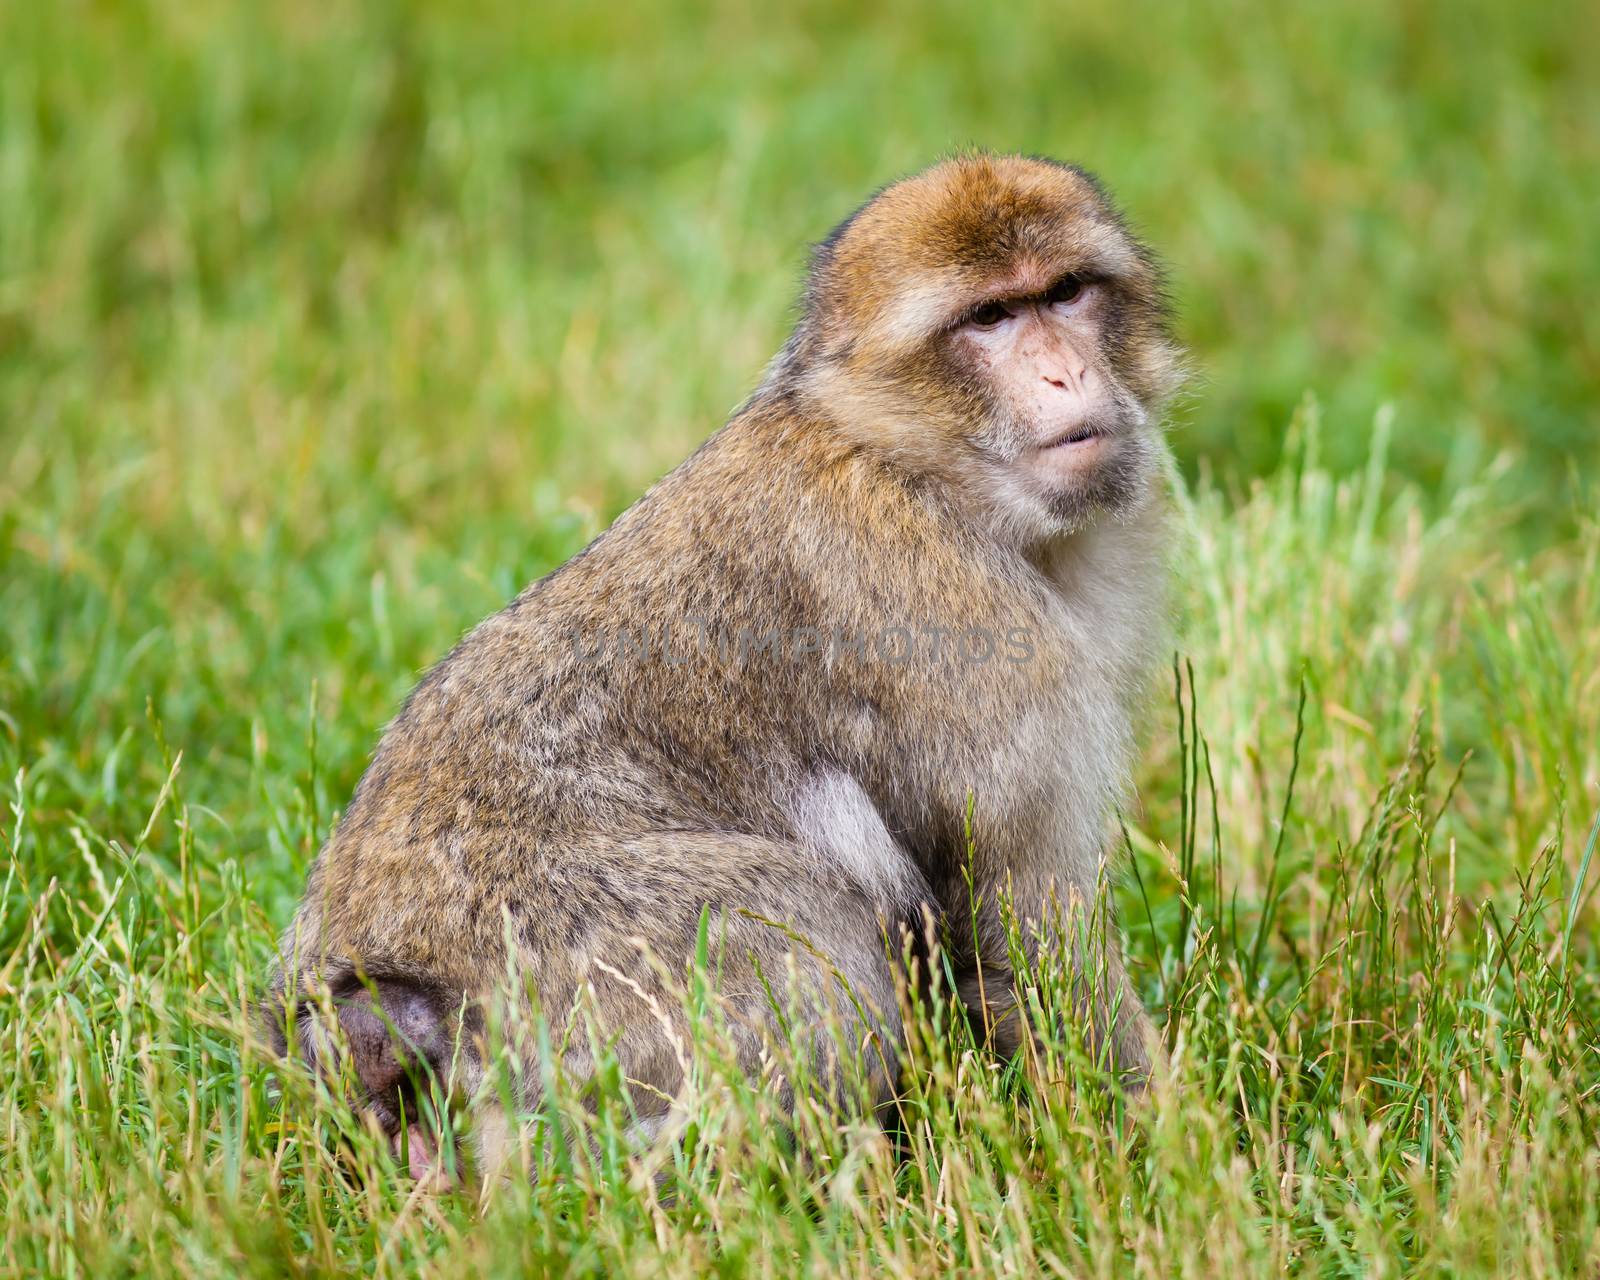 Barbary macaques monkeys live in the Atlas Mountains of Algeria and Morocco.